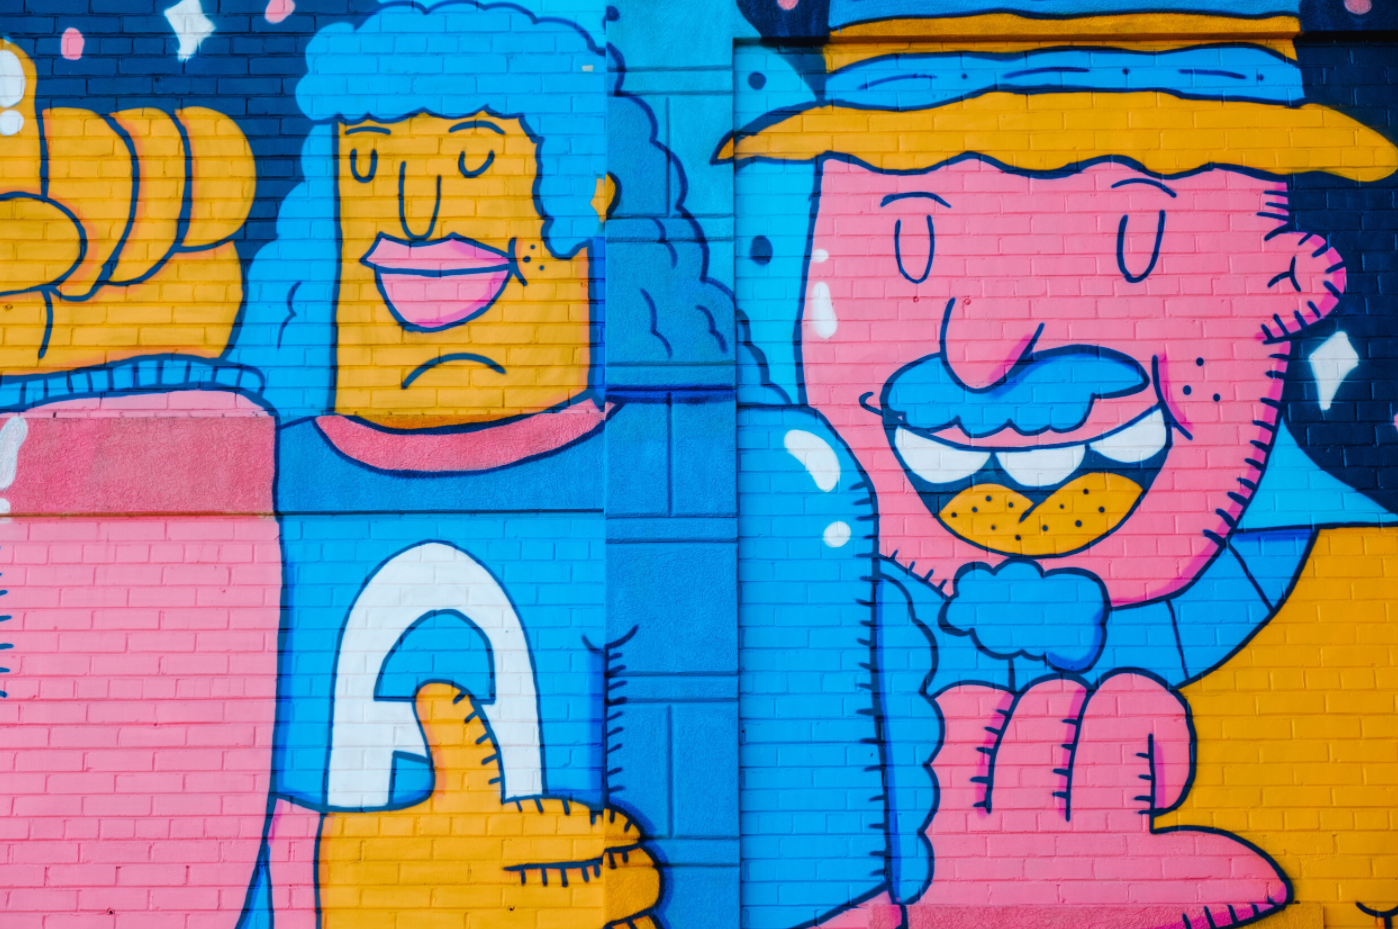 Detailed View of GFB3's "Hanging at the Annex" mural